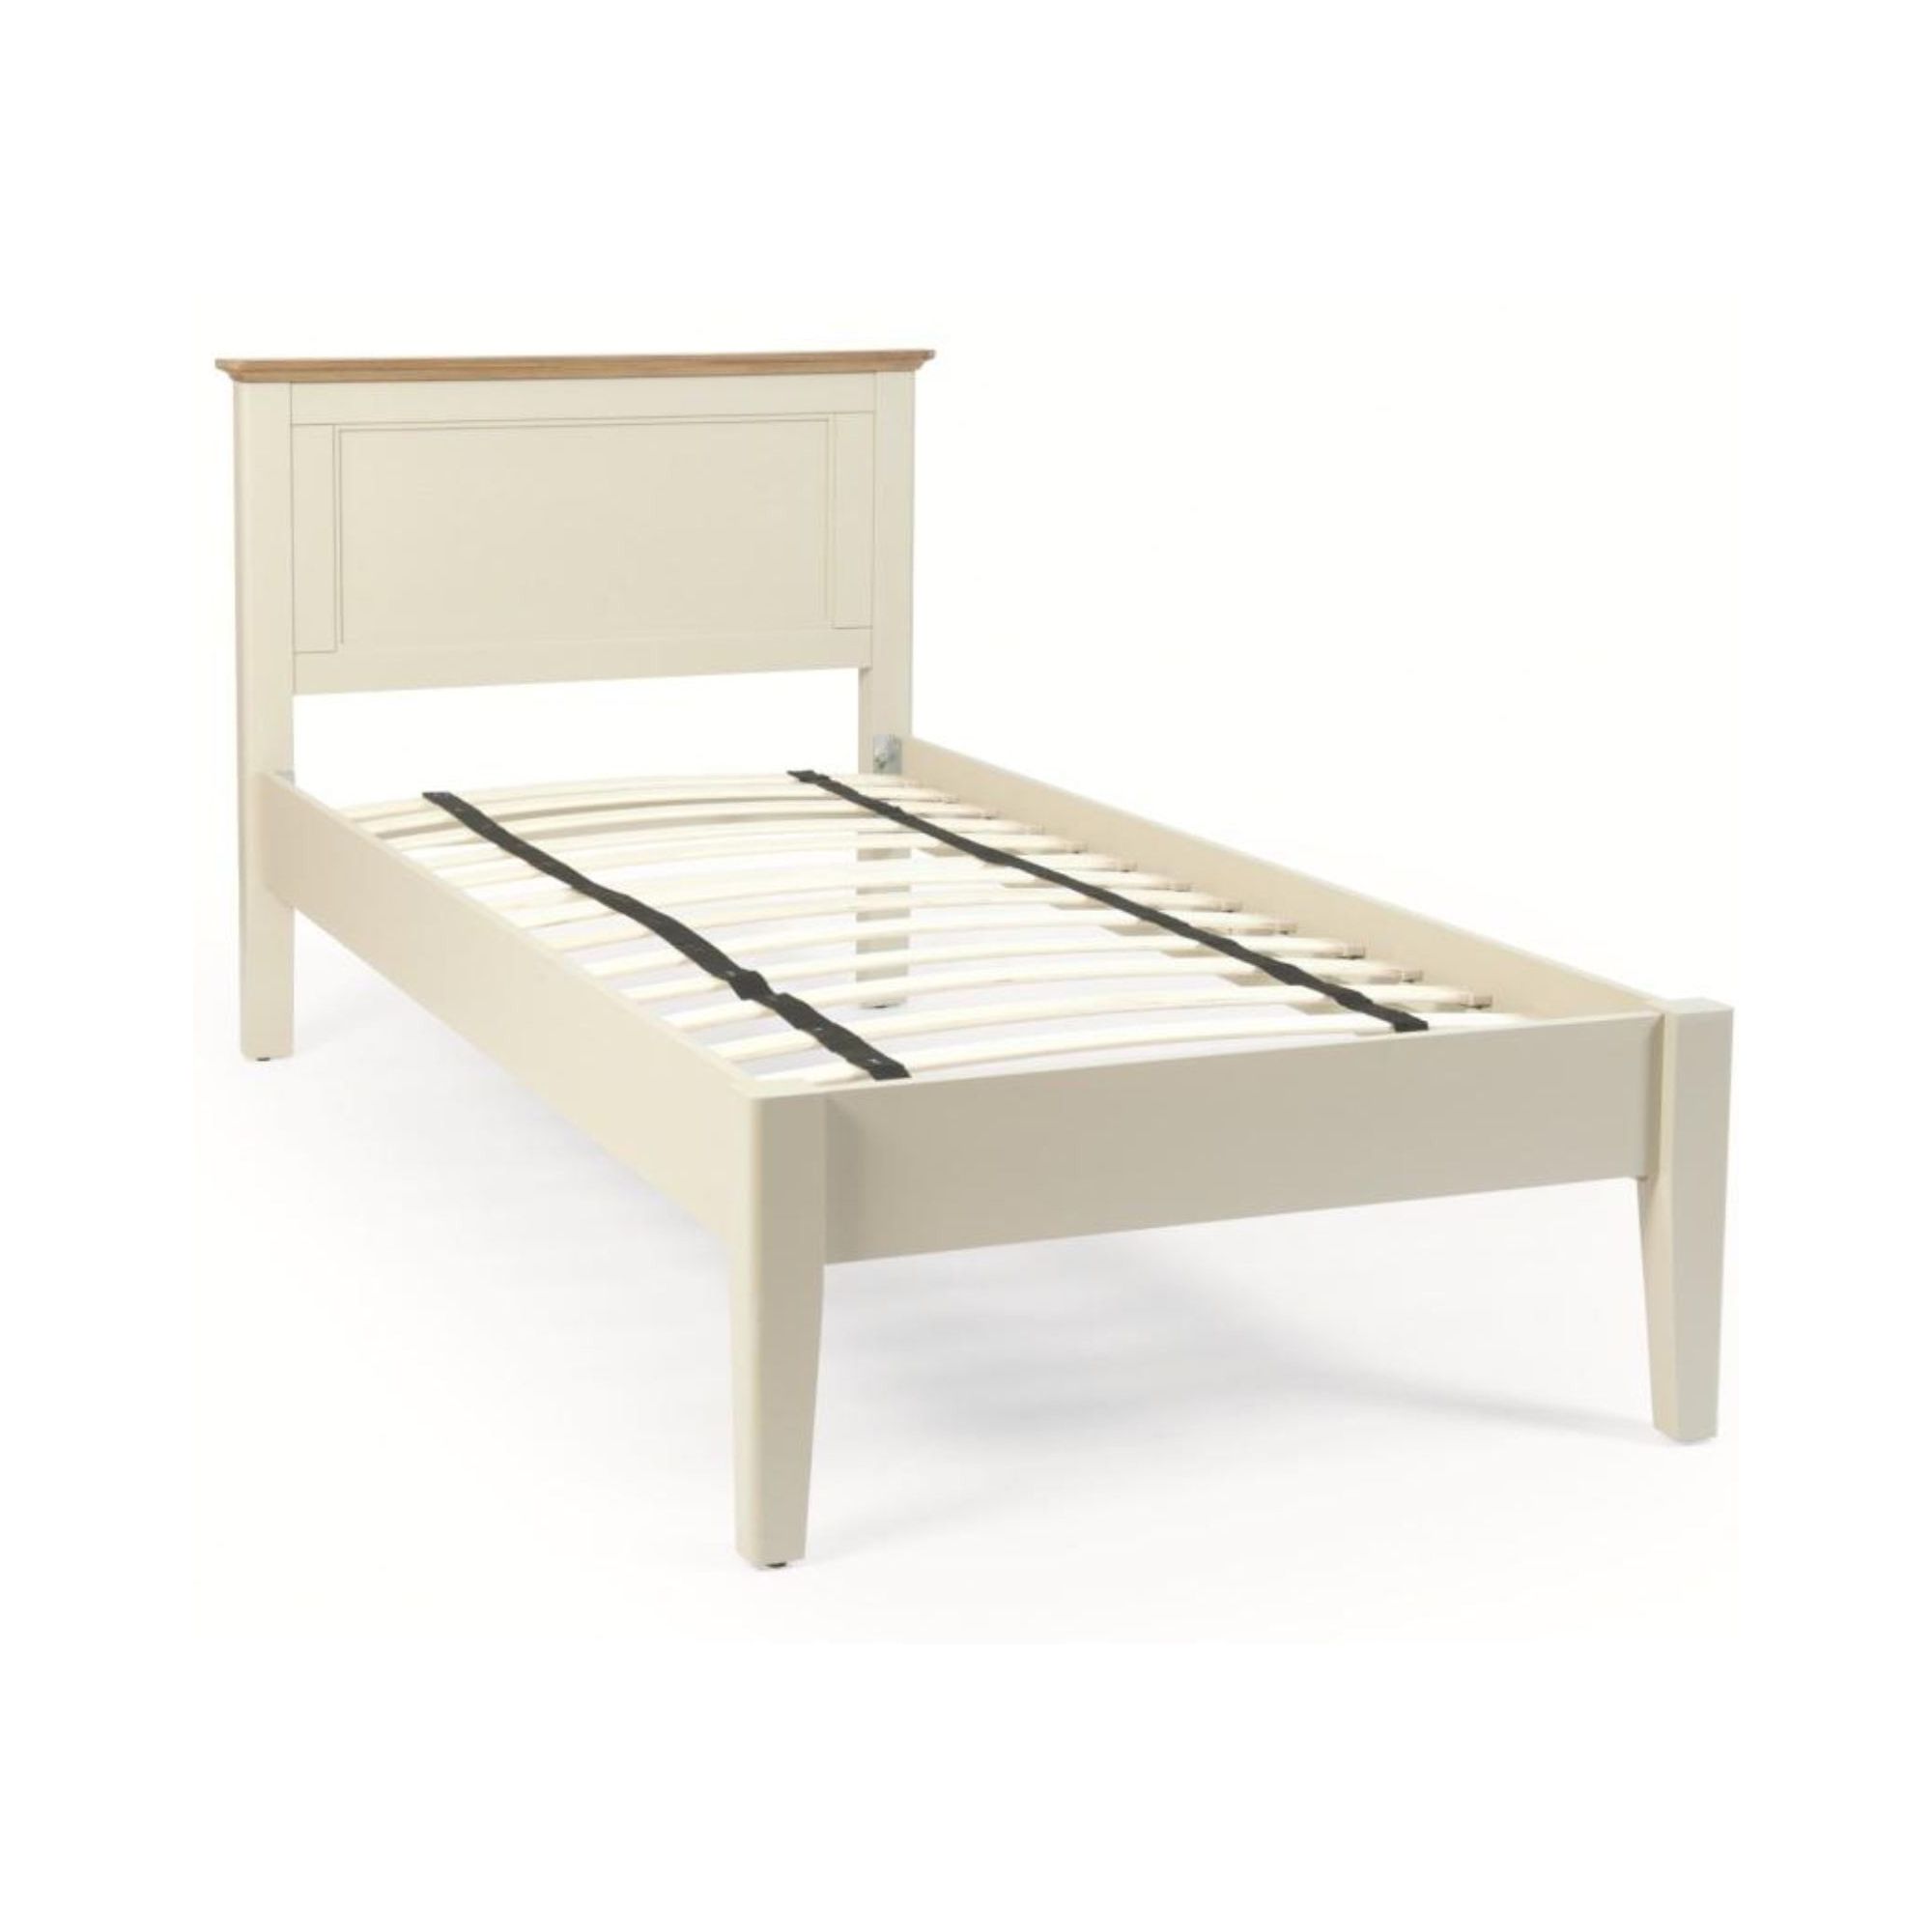 Kelburn Furniture Cottage Painted Bed - Double at Tesco Direct